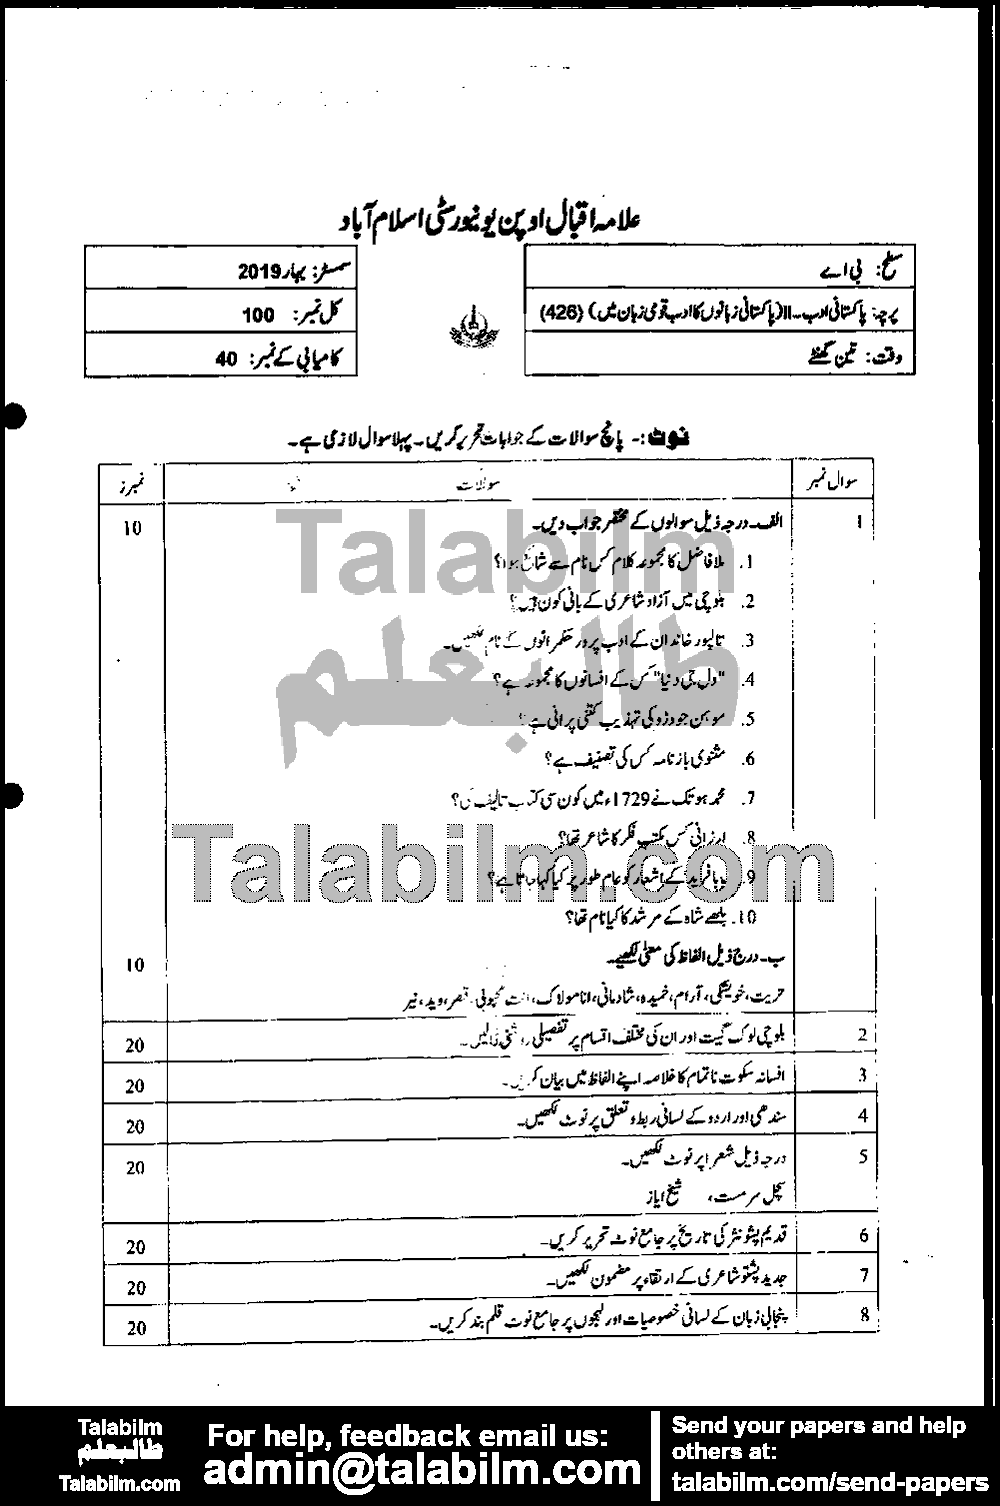 Pakistani Adab-II 426 past paper for Spring 2019